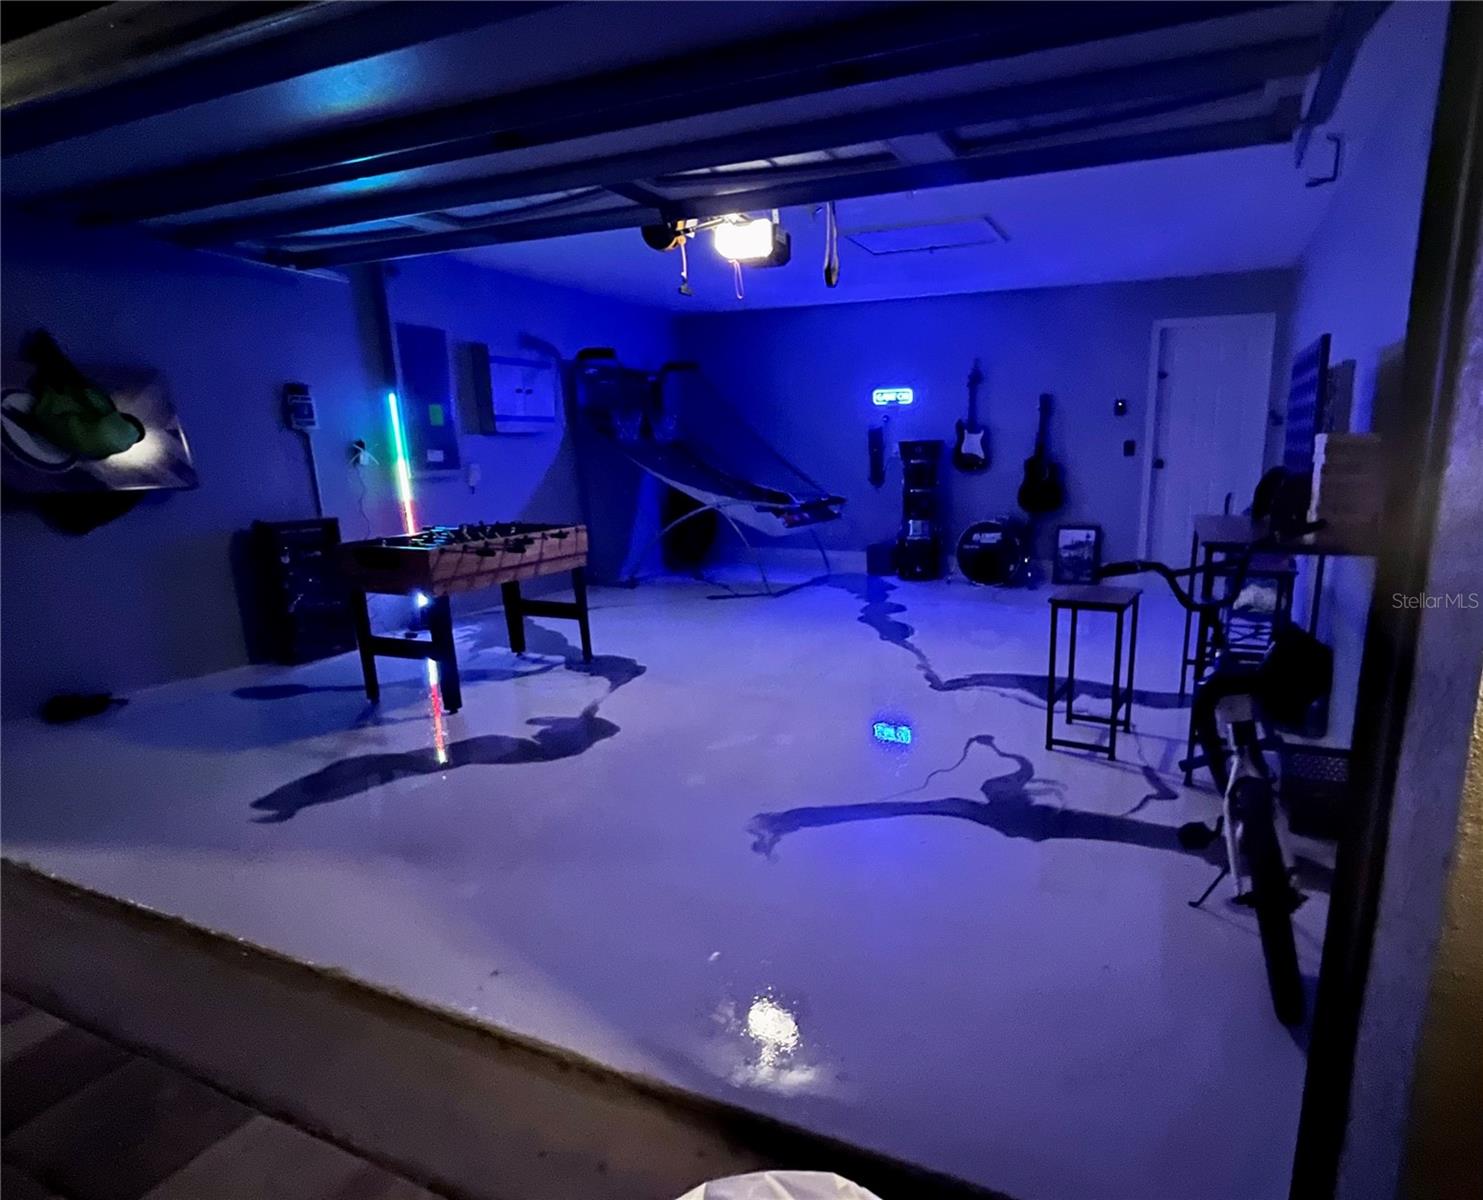 Garage at night with games and epoxy floors